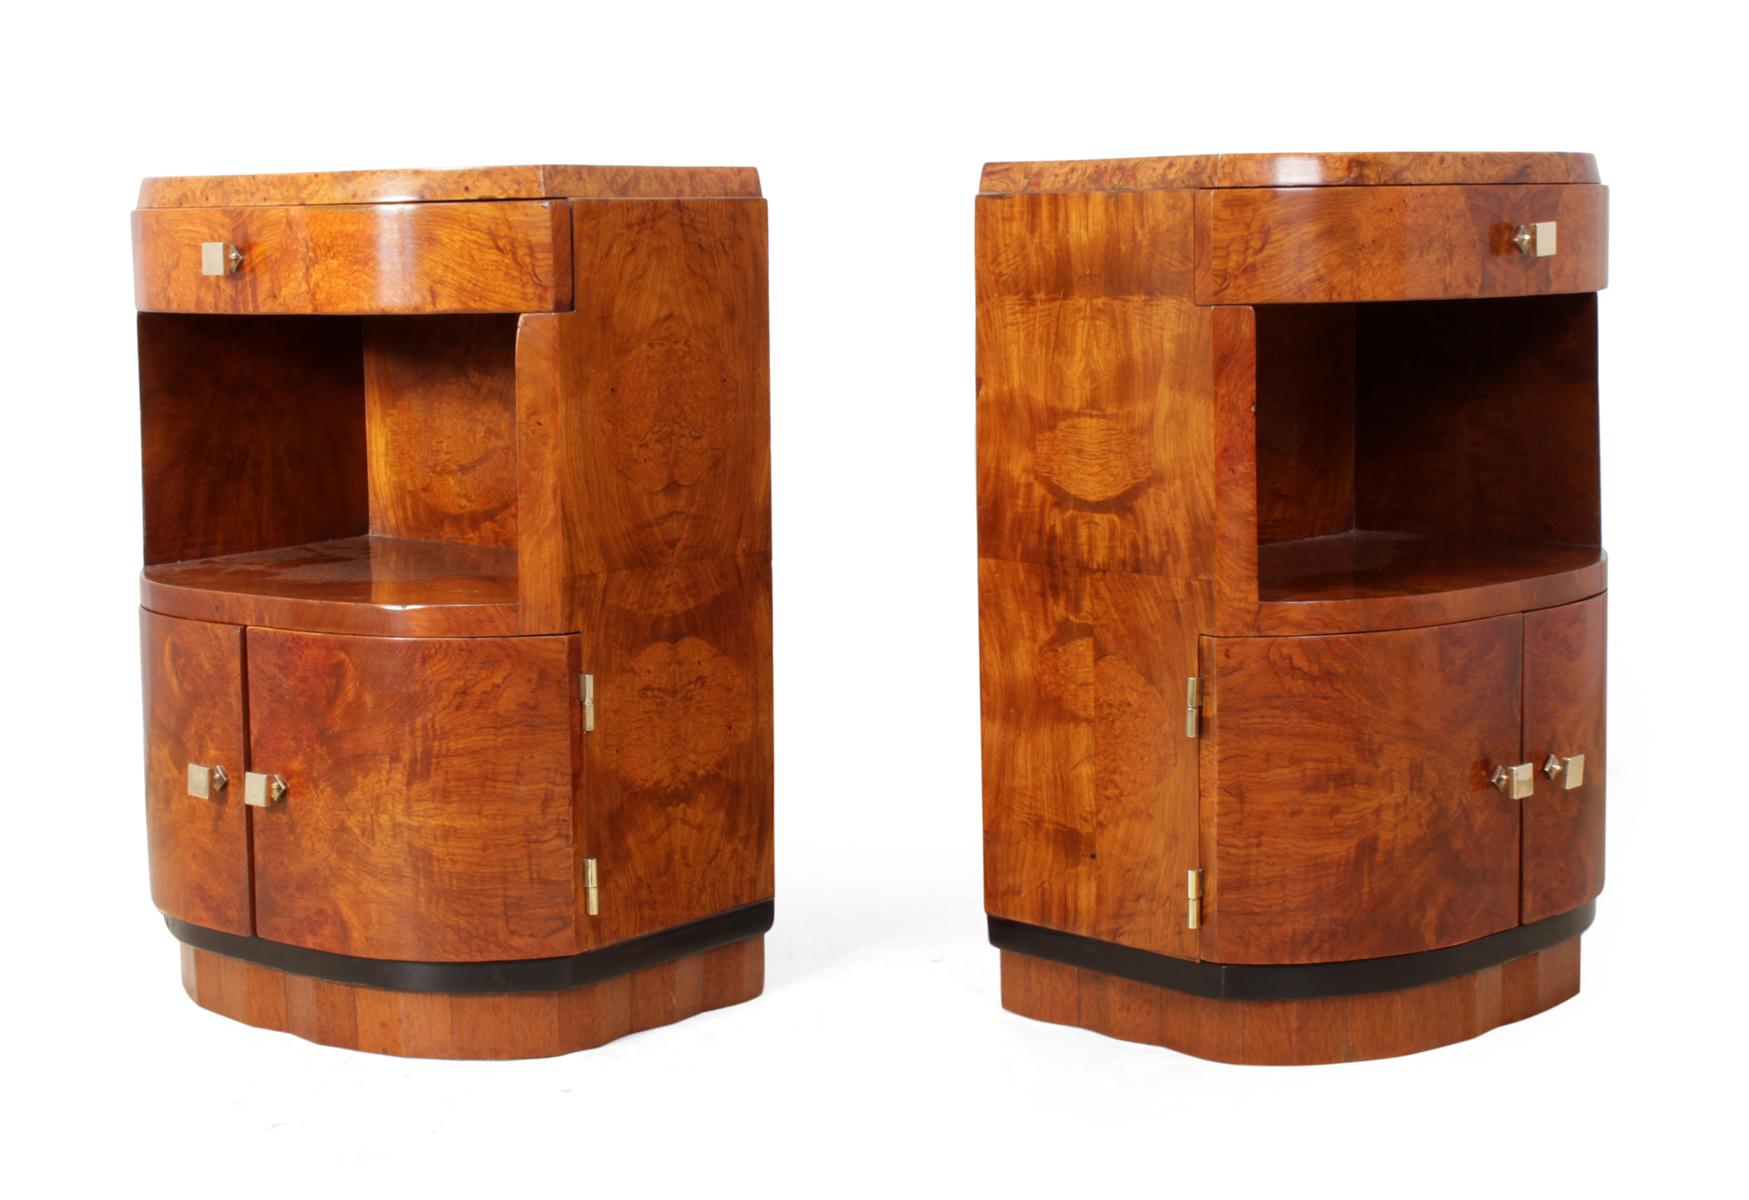 Pair of Art Deco bedside cabinets
A pair of Amboyna Art Deco bedside cabinets with single drawer, shelf and double doors below with polished bronze fittings, the cabinets are been fully re polished and are in excellent condition throughout

Age: